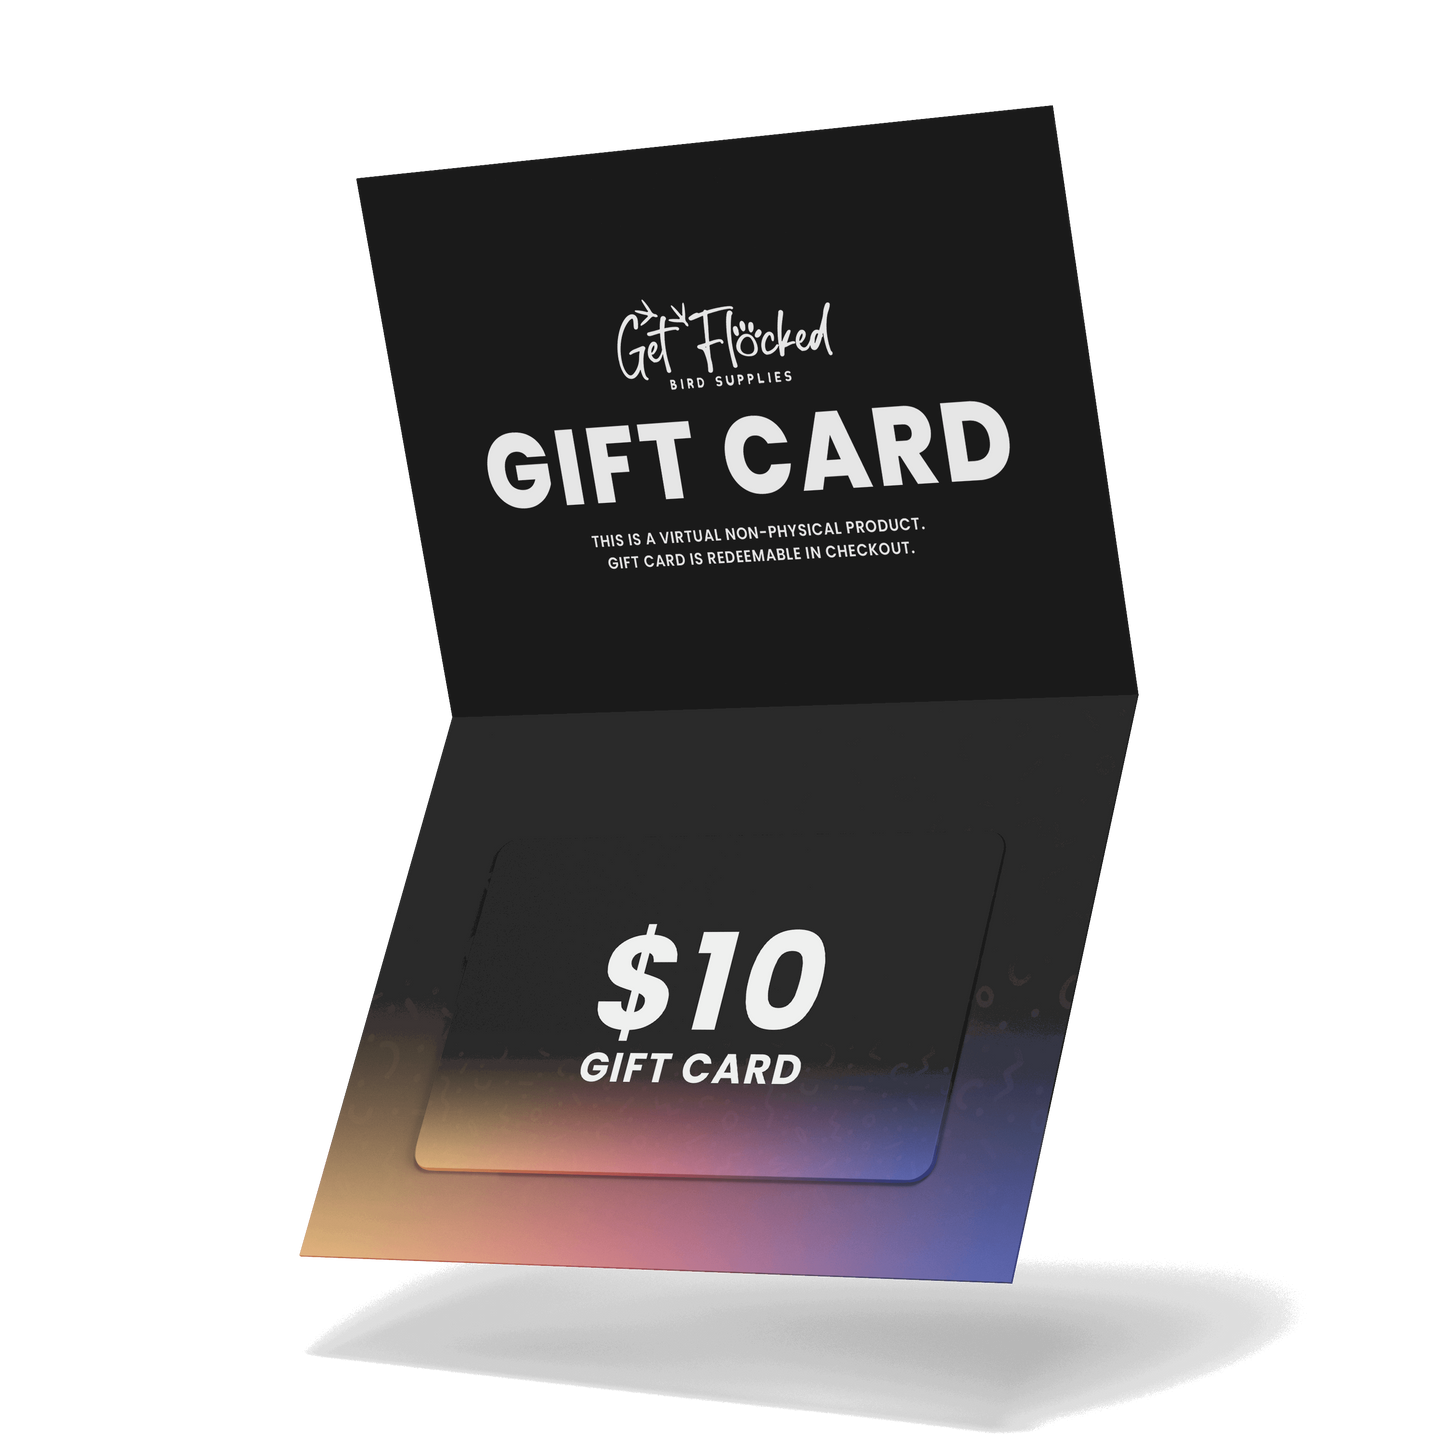 Get Flocked Gift Card from Get Flocked